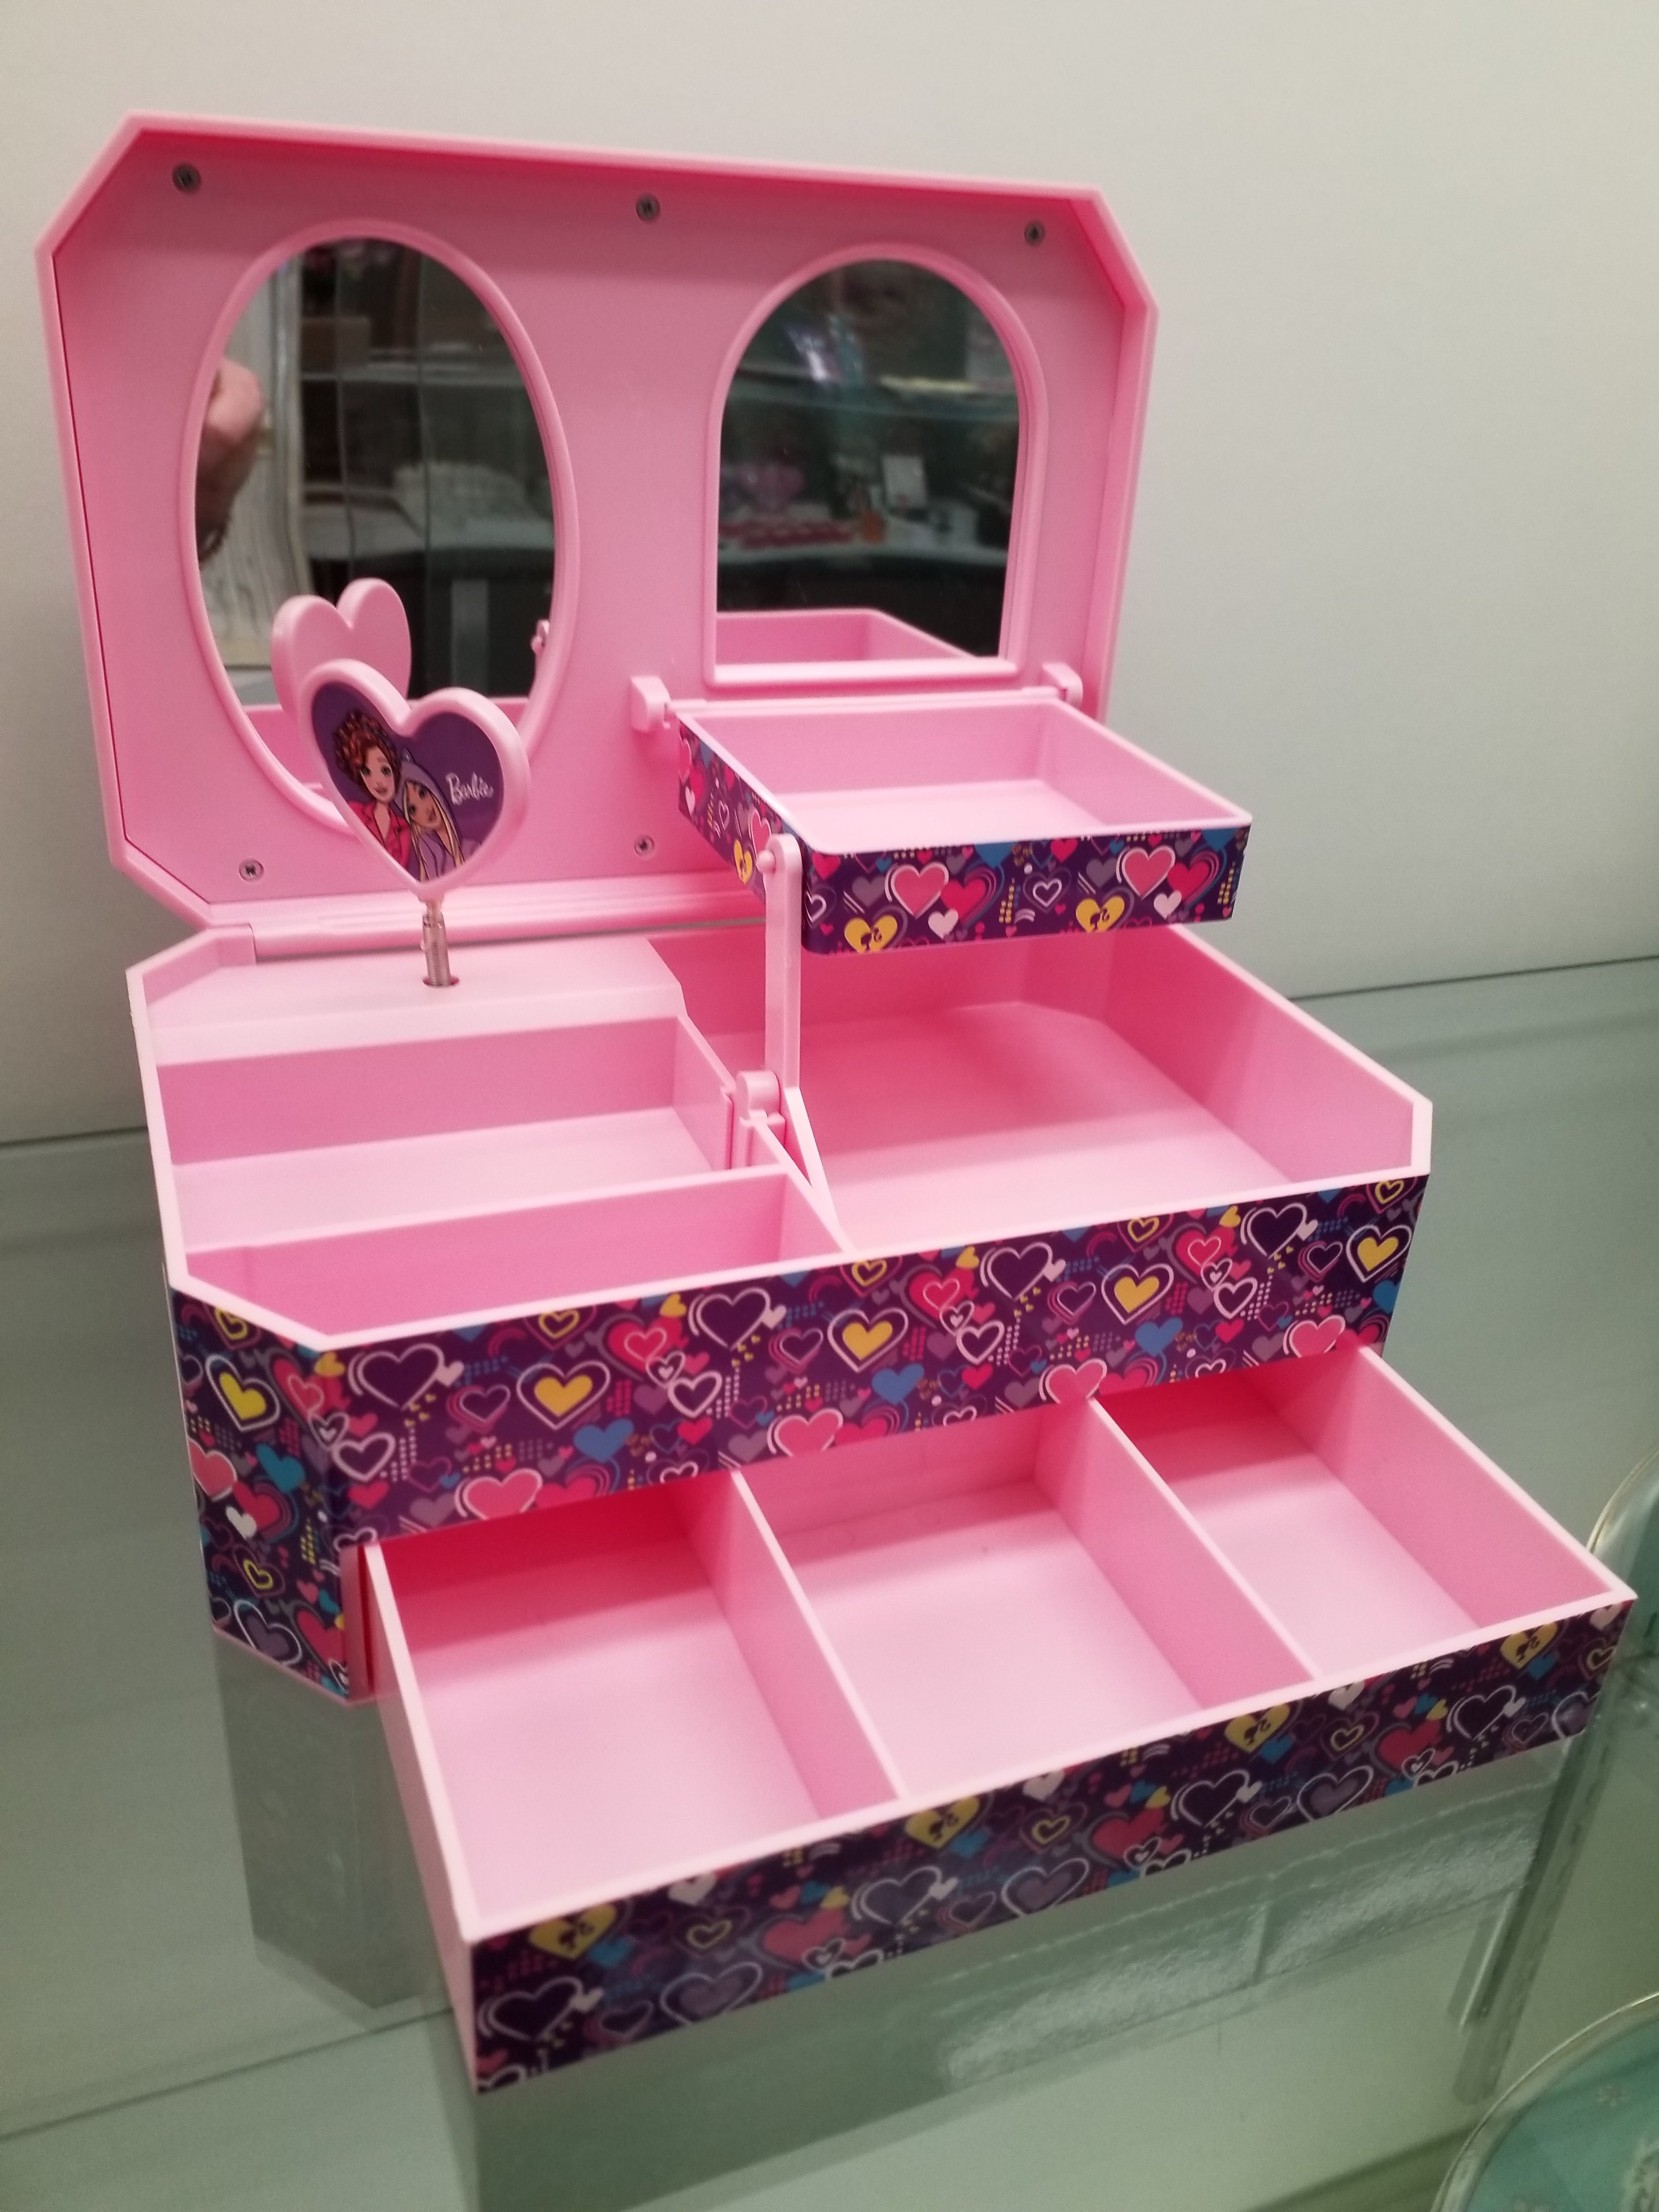 Children's Jewellery Box - Musical with Spinning Heart